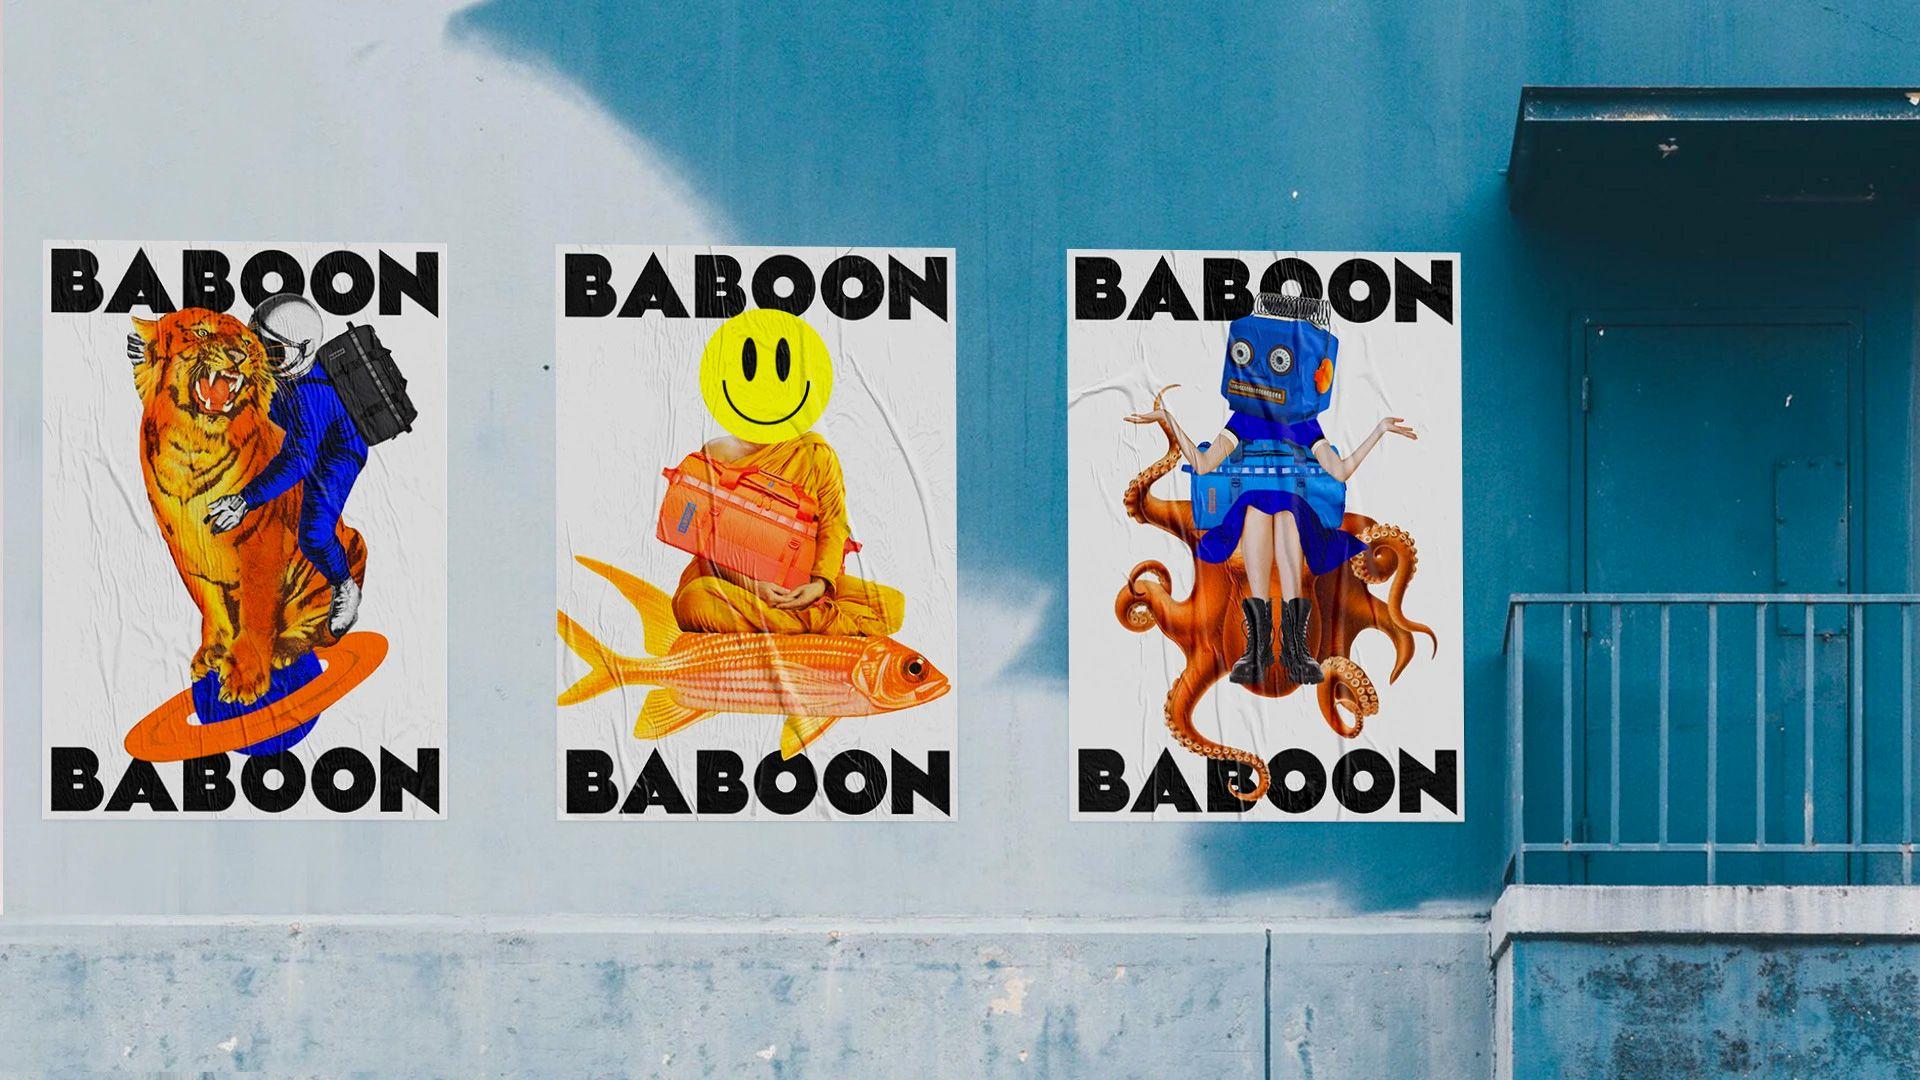 Walsh Logo - Brand New: New Logo and Identity for Baboon by Sagmeister & Walsh